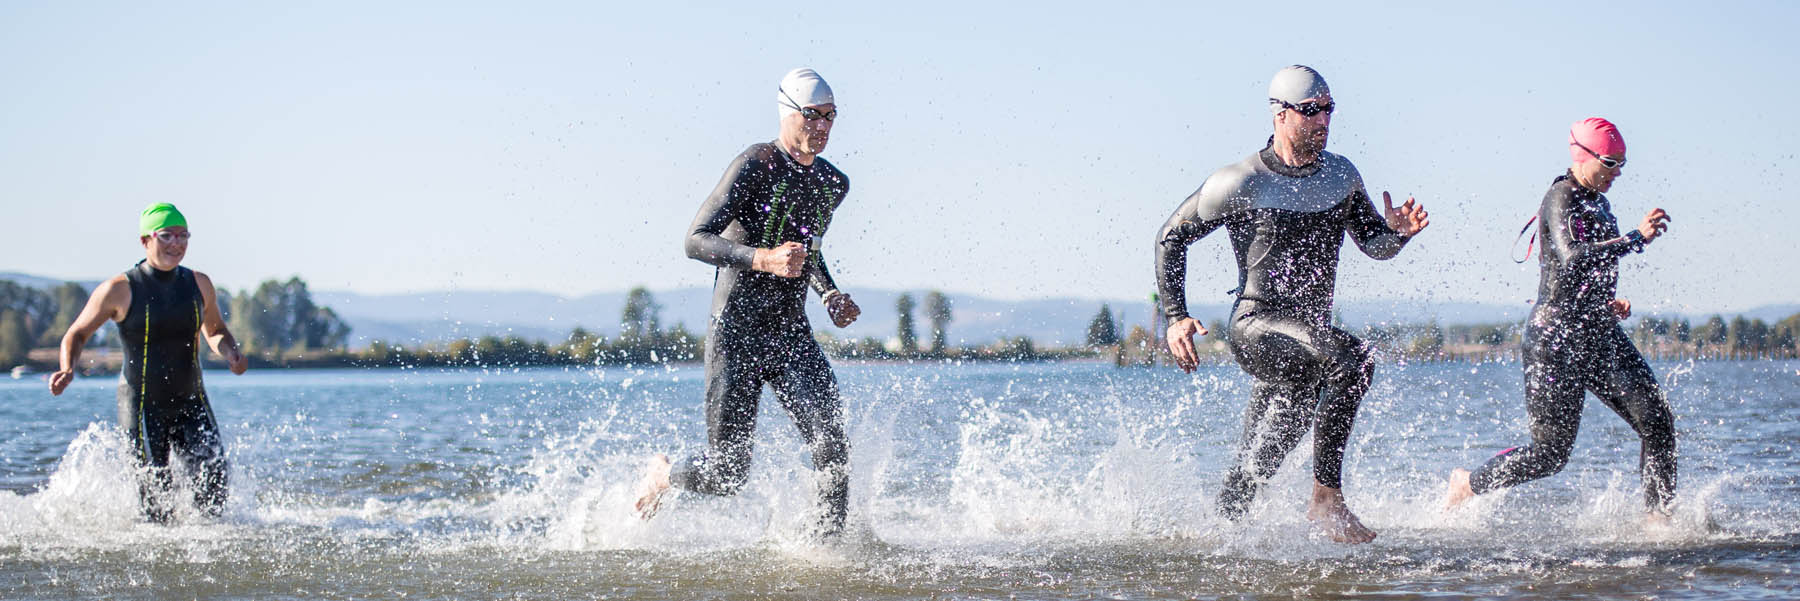 Four athletes wearing wetsuits and swimming goggles running through a body of water